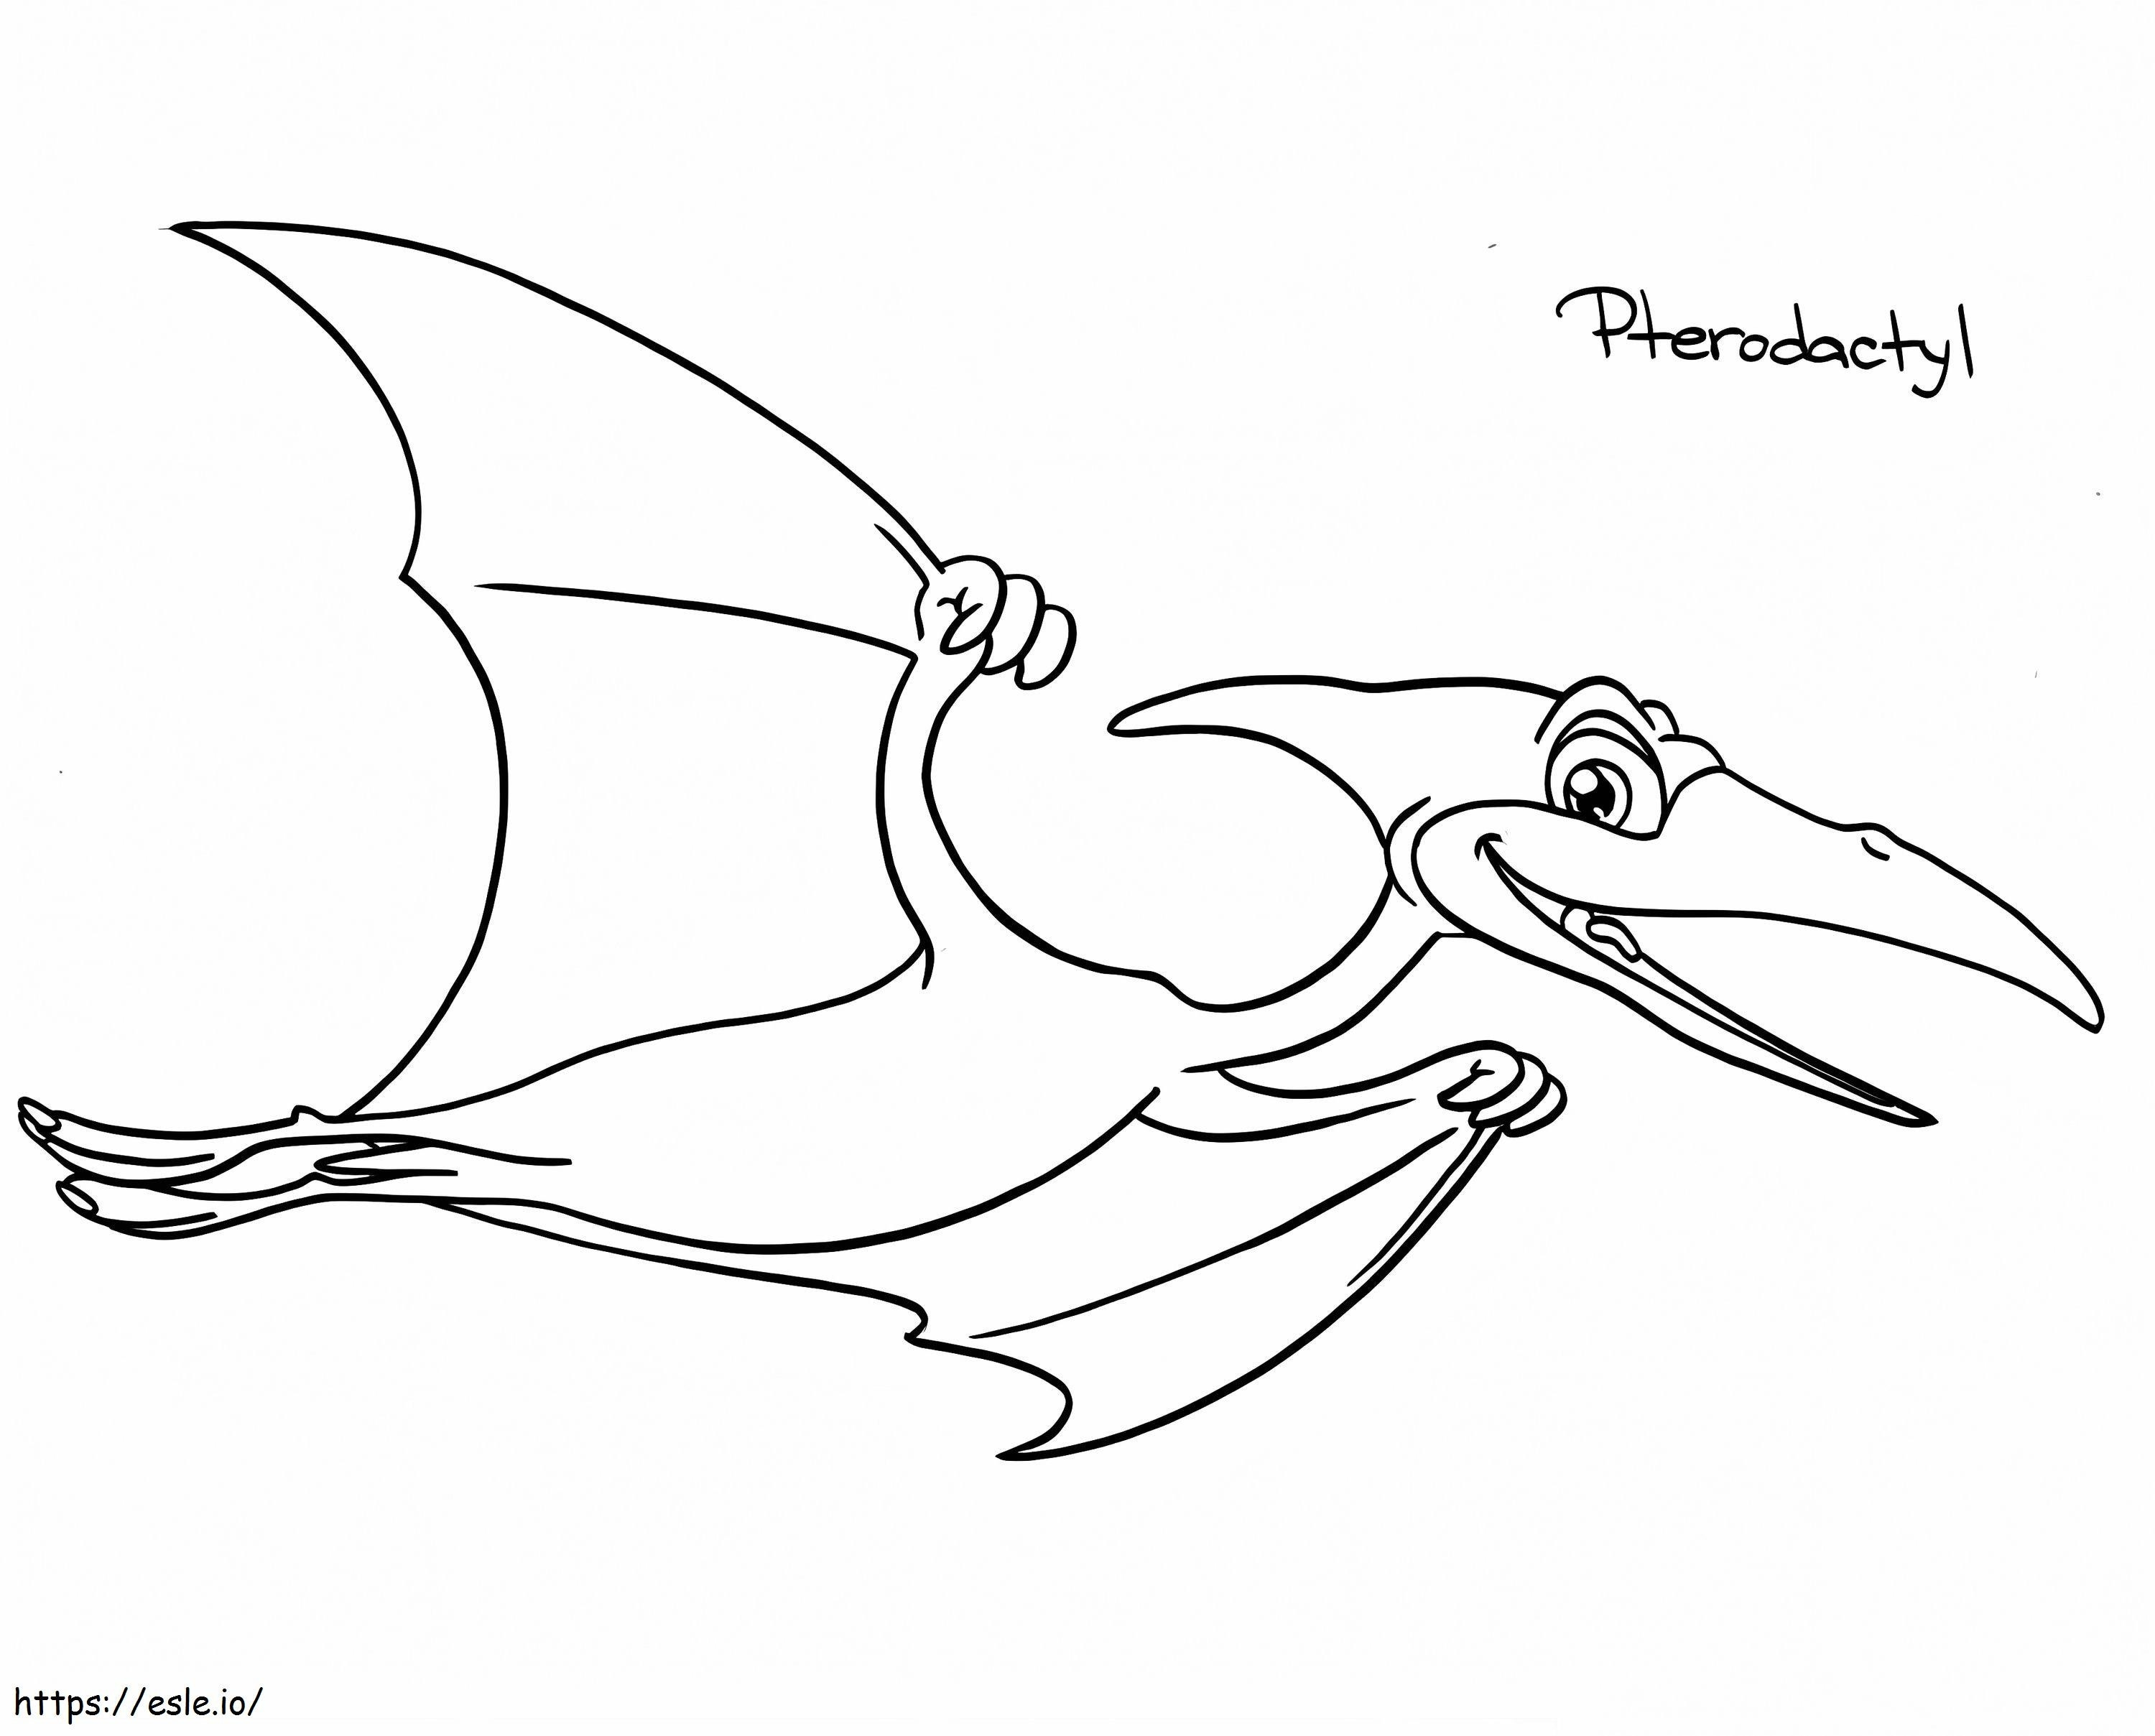 Smiling Pterodactyl coloring page